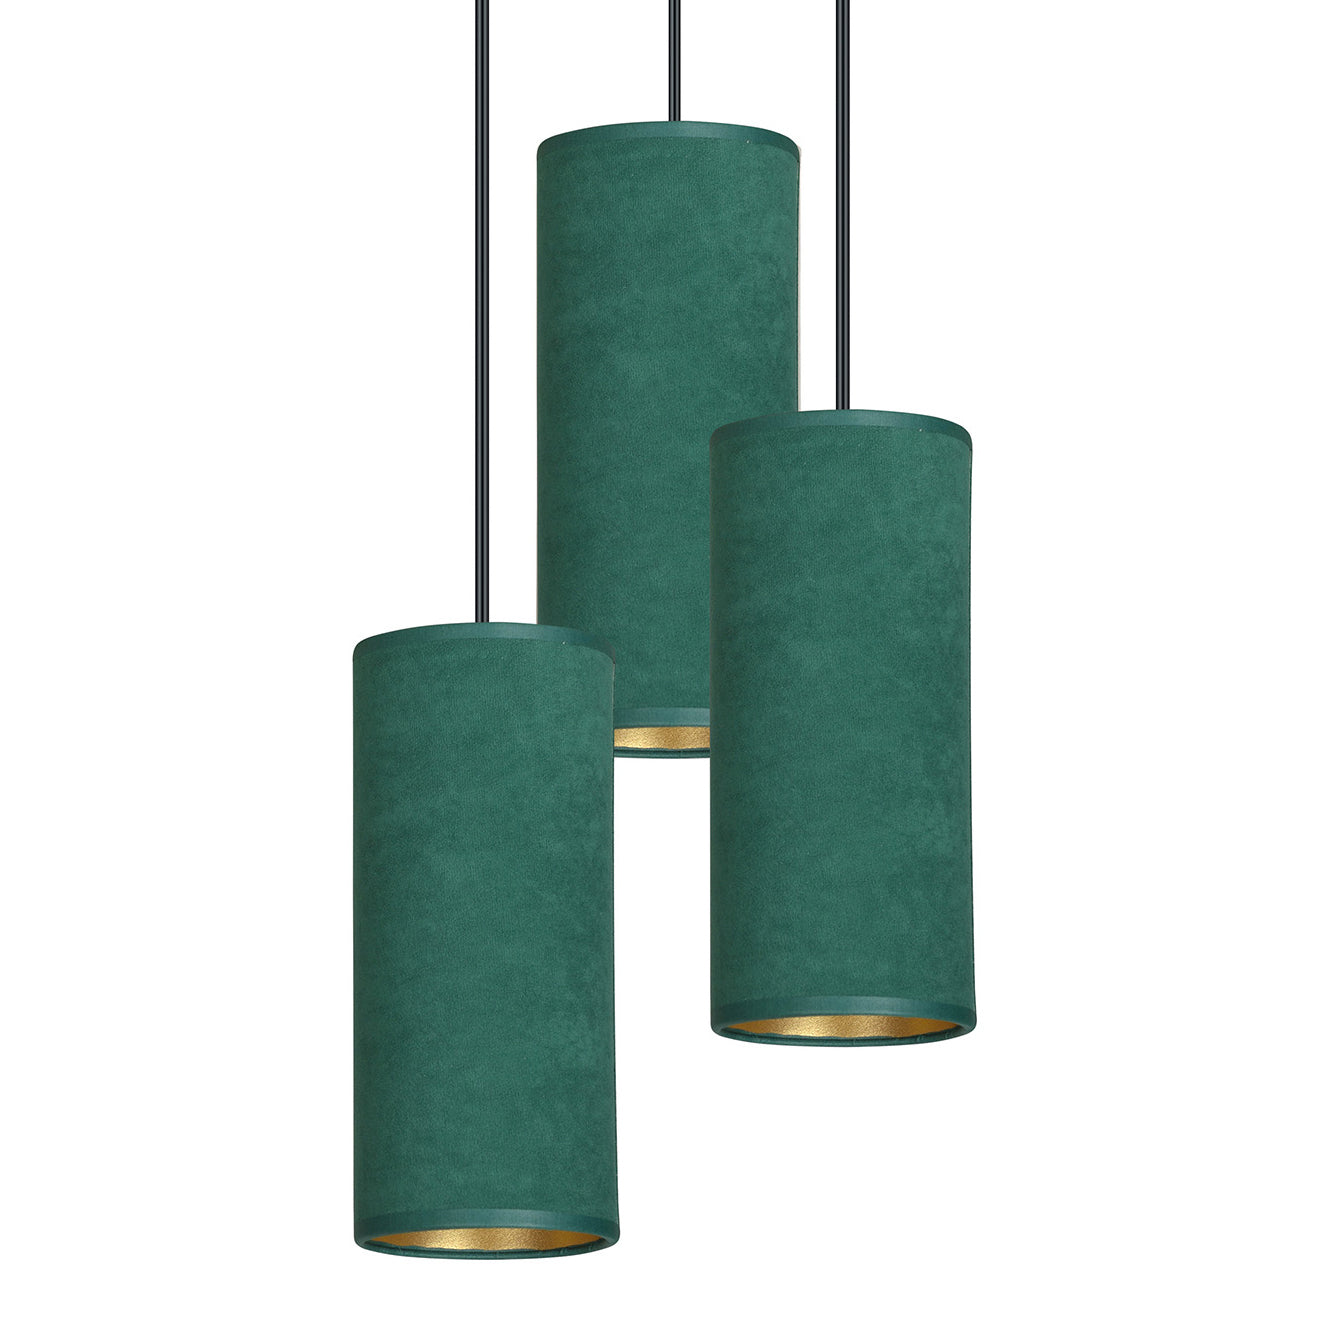 Our Bente is modern and contemporary in its design which is inspired by the industrial trend with a touch of opulence. The shades are made from a luxury green fabric with a golden inner creating a stand out feature for any living, dining or bedroom.